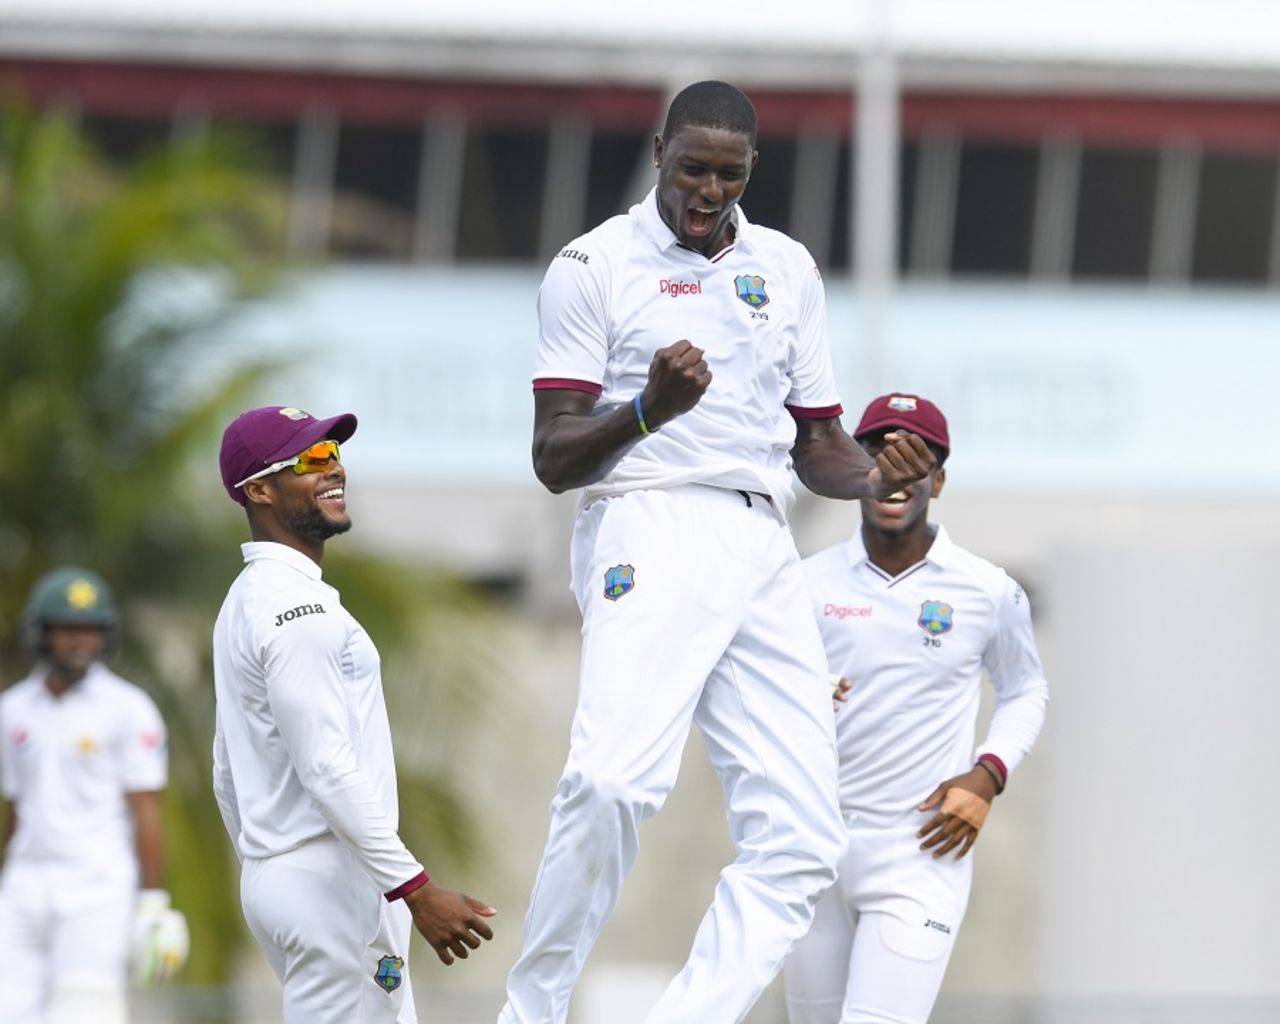 Jason Holder bowled an incisive spell before tea, West Indies v Pakistan, 2nd Test, Bridgetown, 3rd day, May 2, 2017